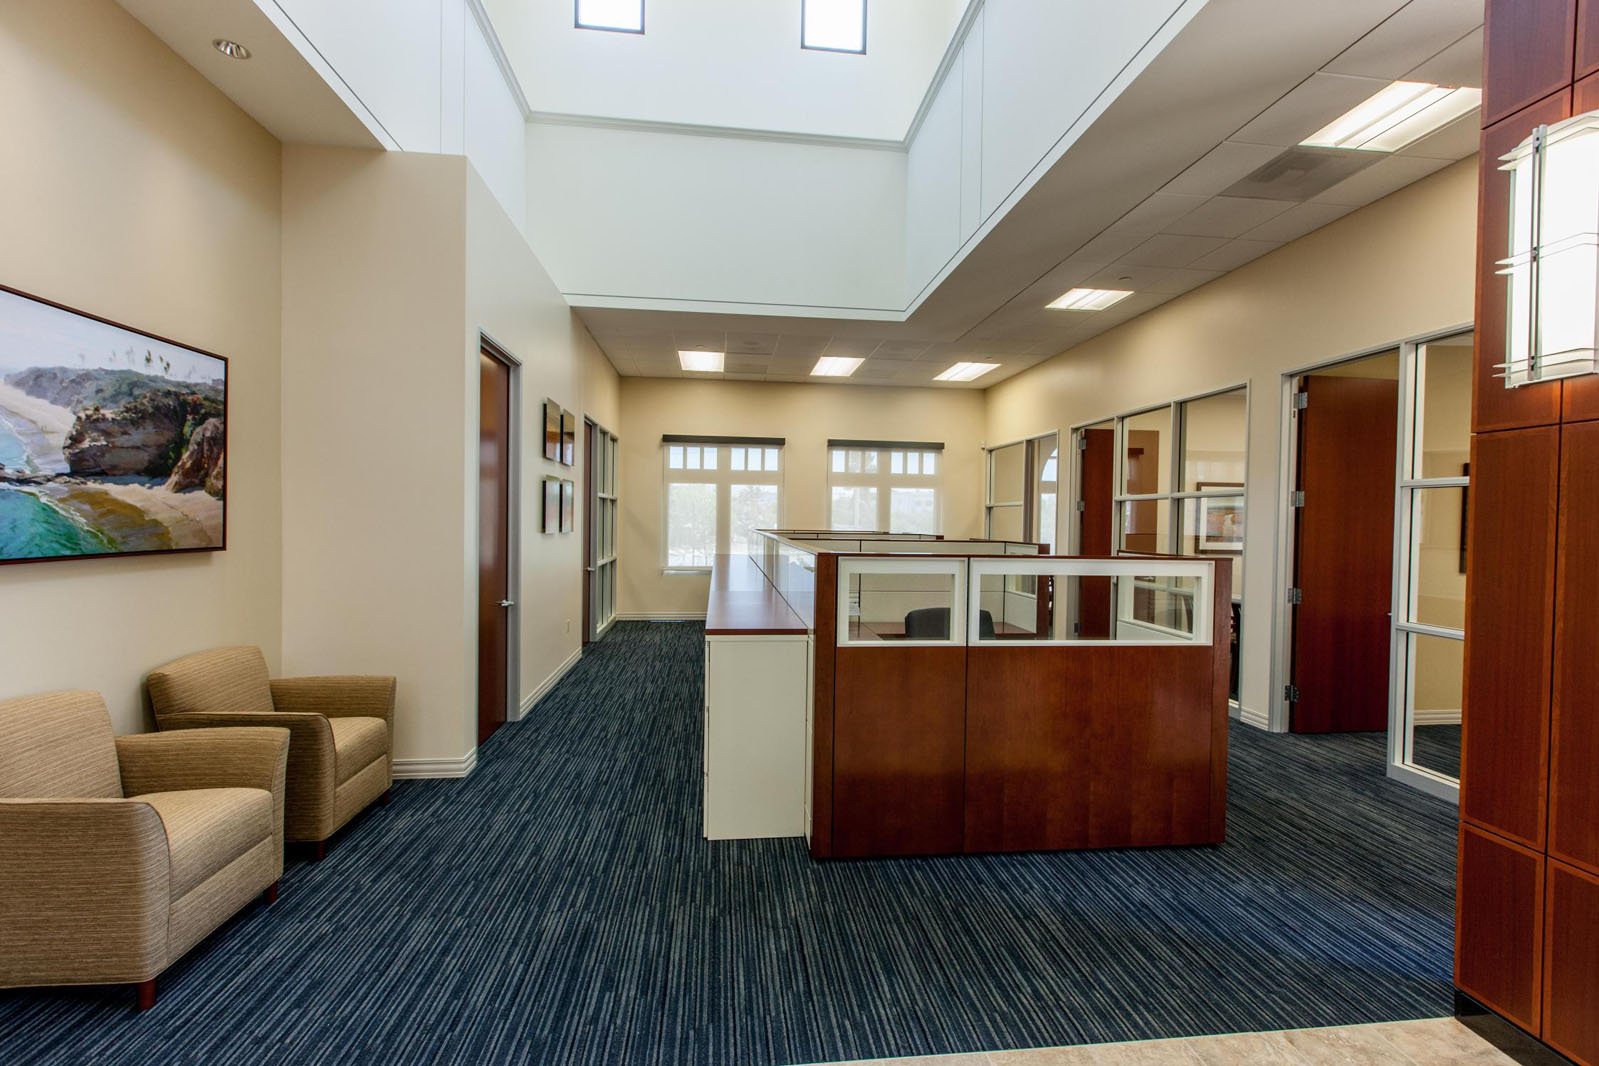 California Bank and Trust Palomar Commons interior view